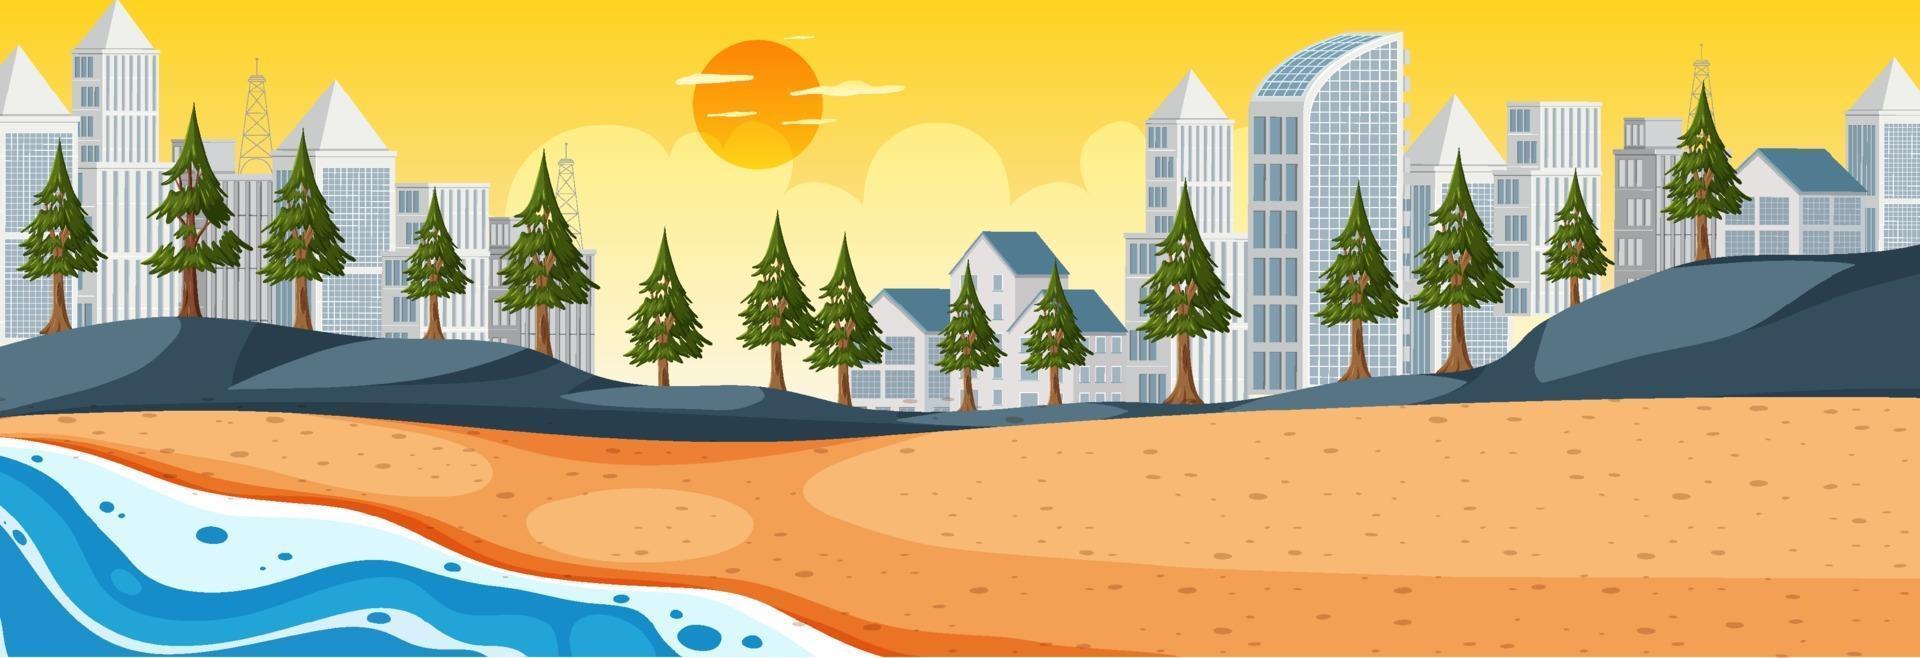 Beach horizontal scene at sunset time with cityscape background vector